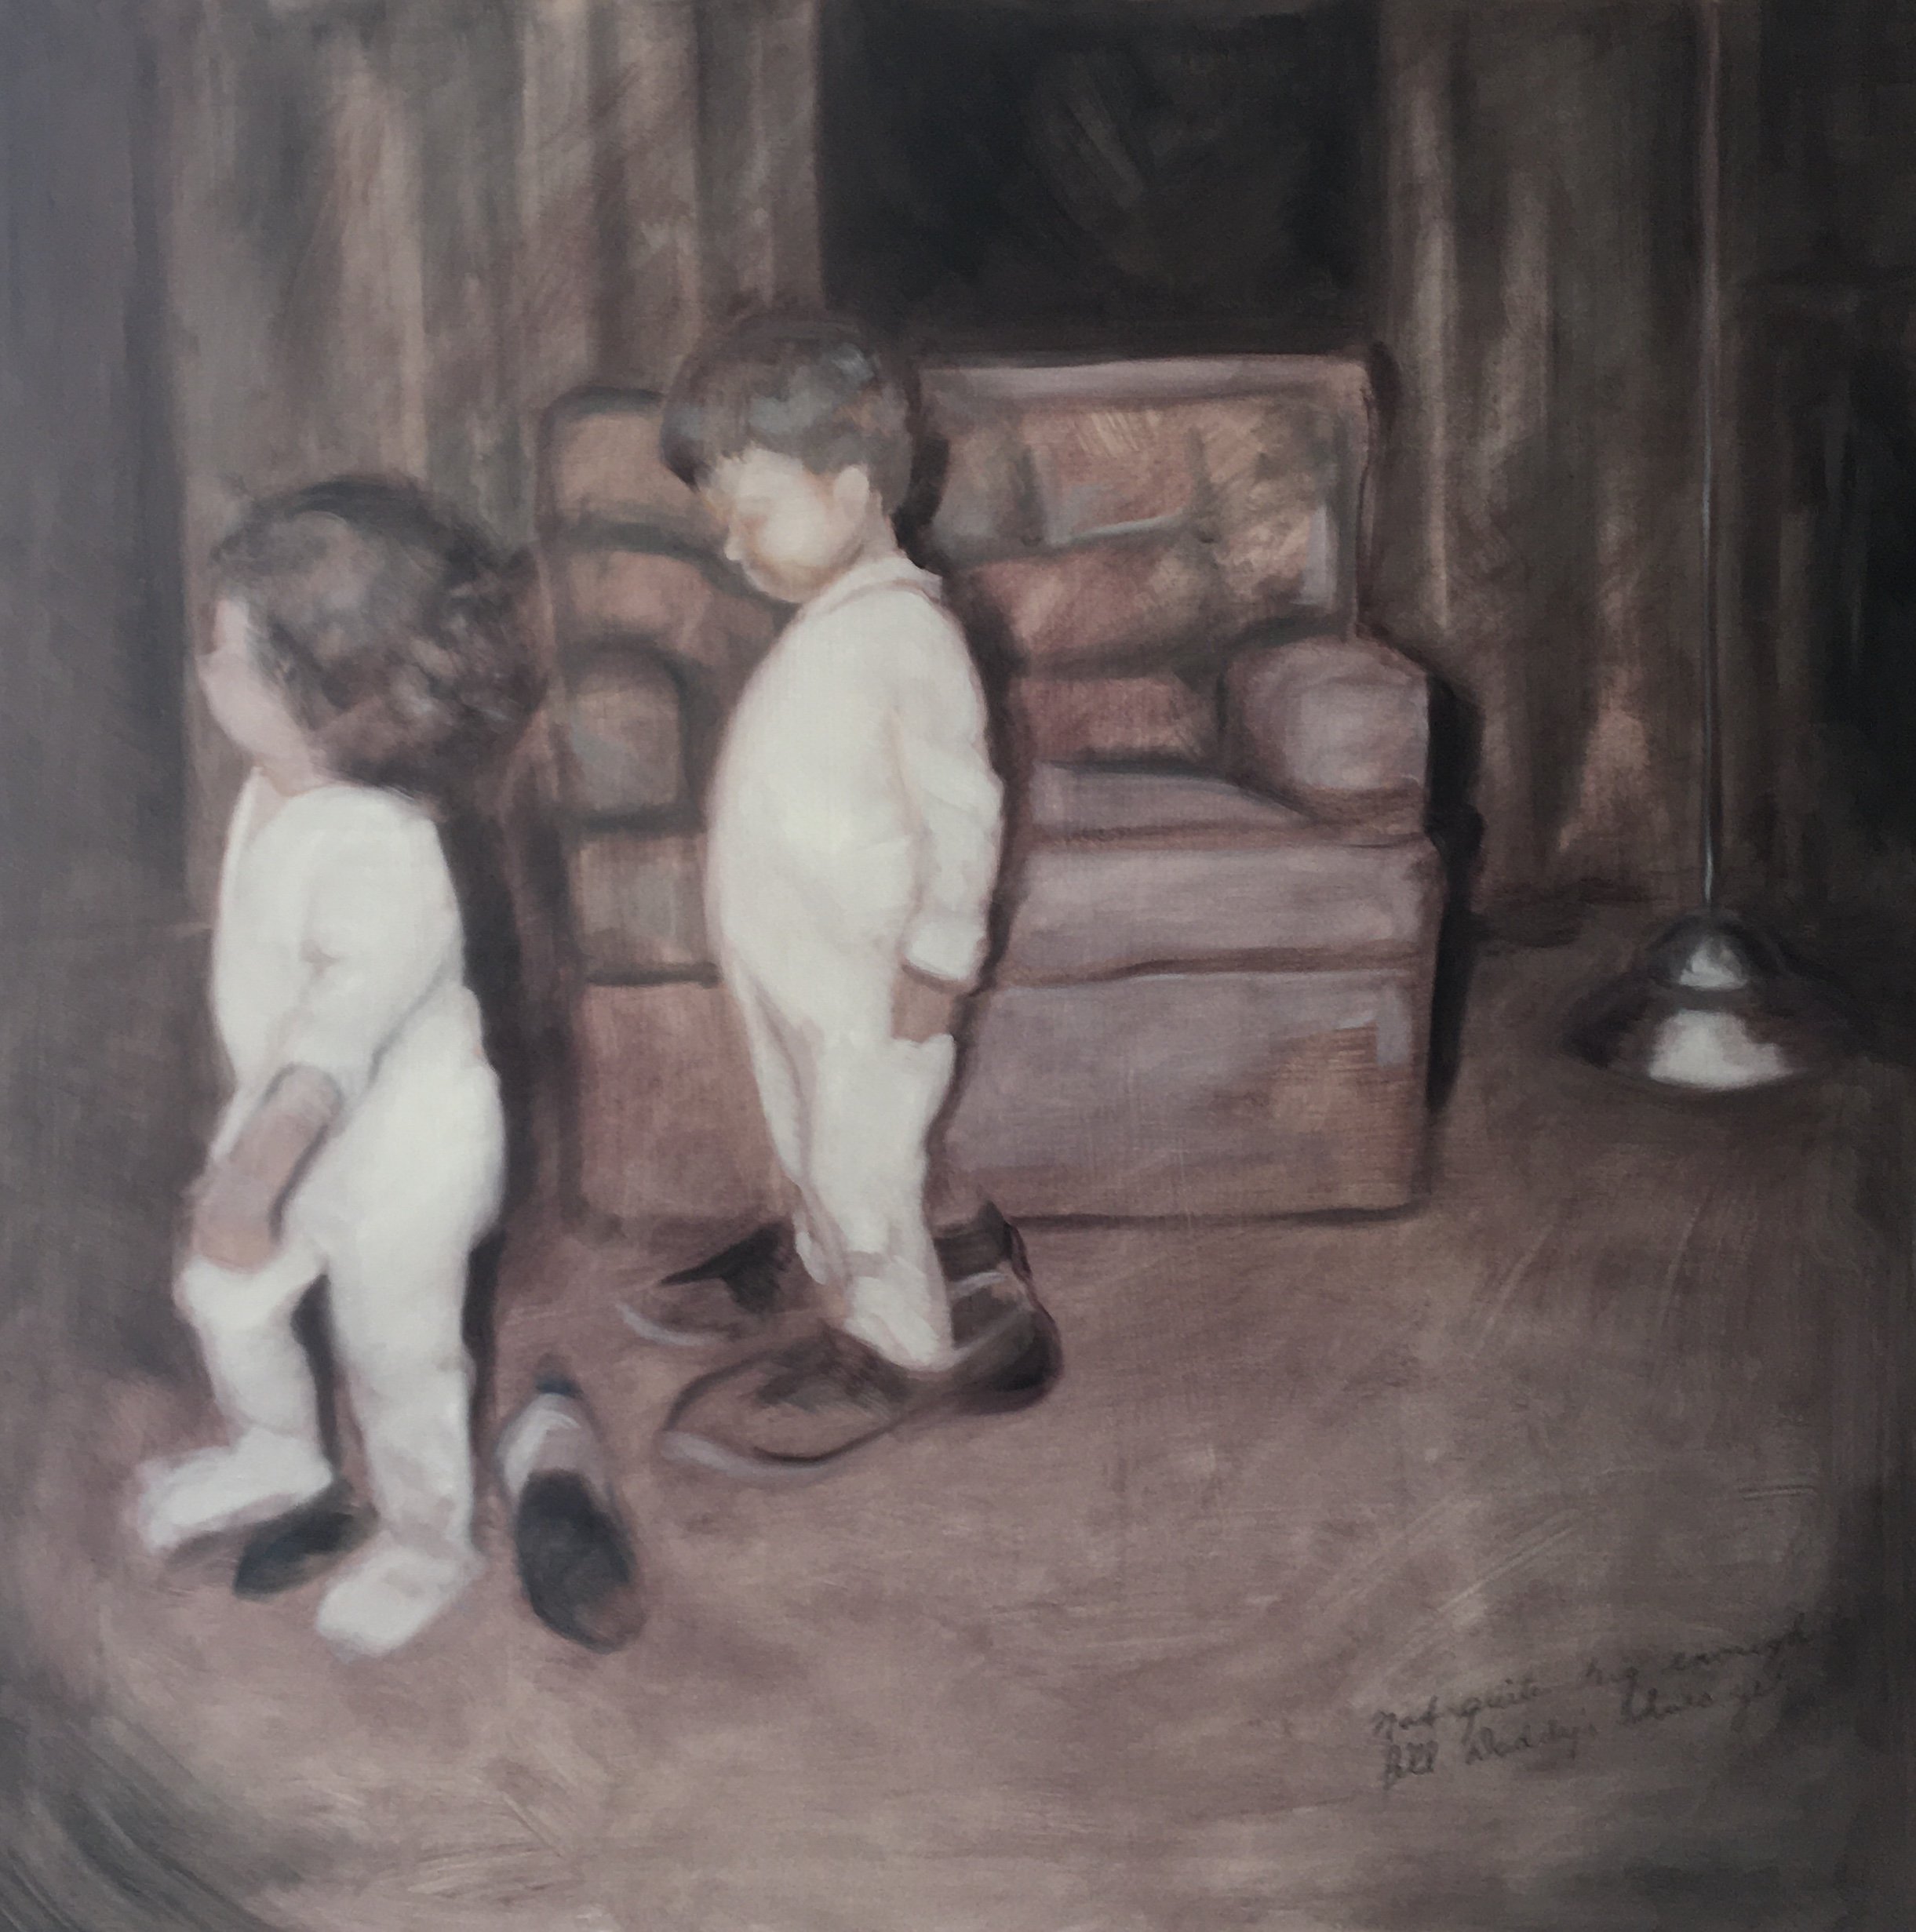   Daddy’s Shoes   oil on panel  30” x 30”  2021 